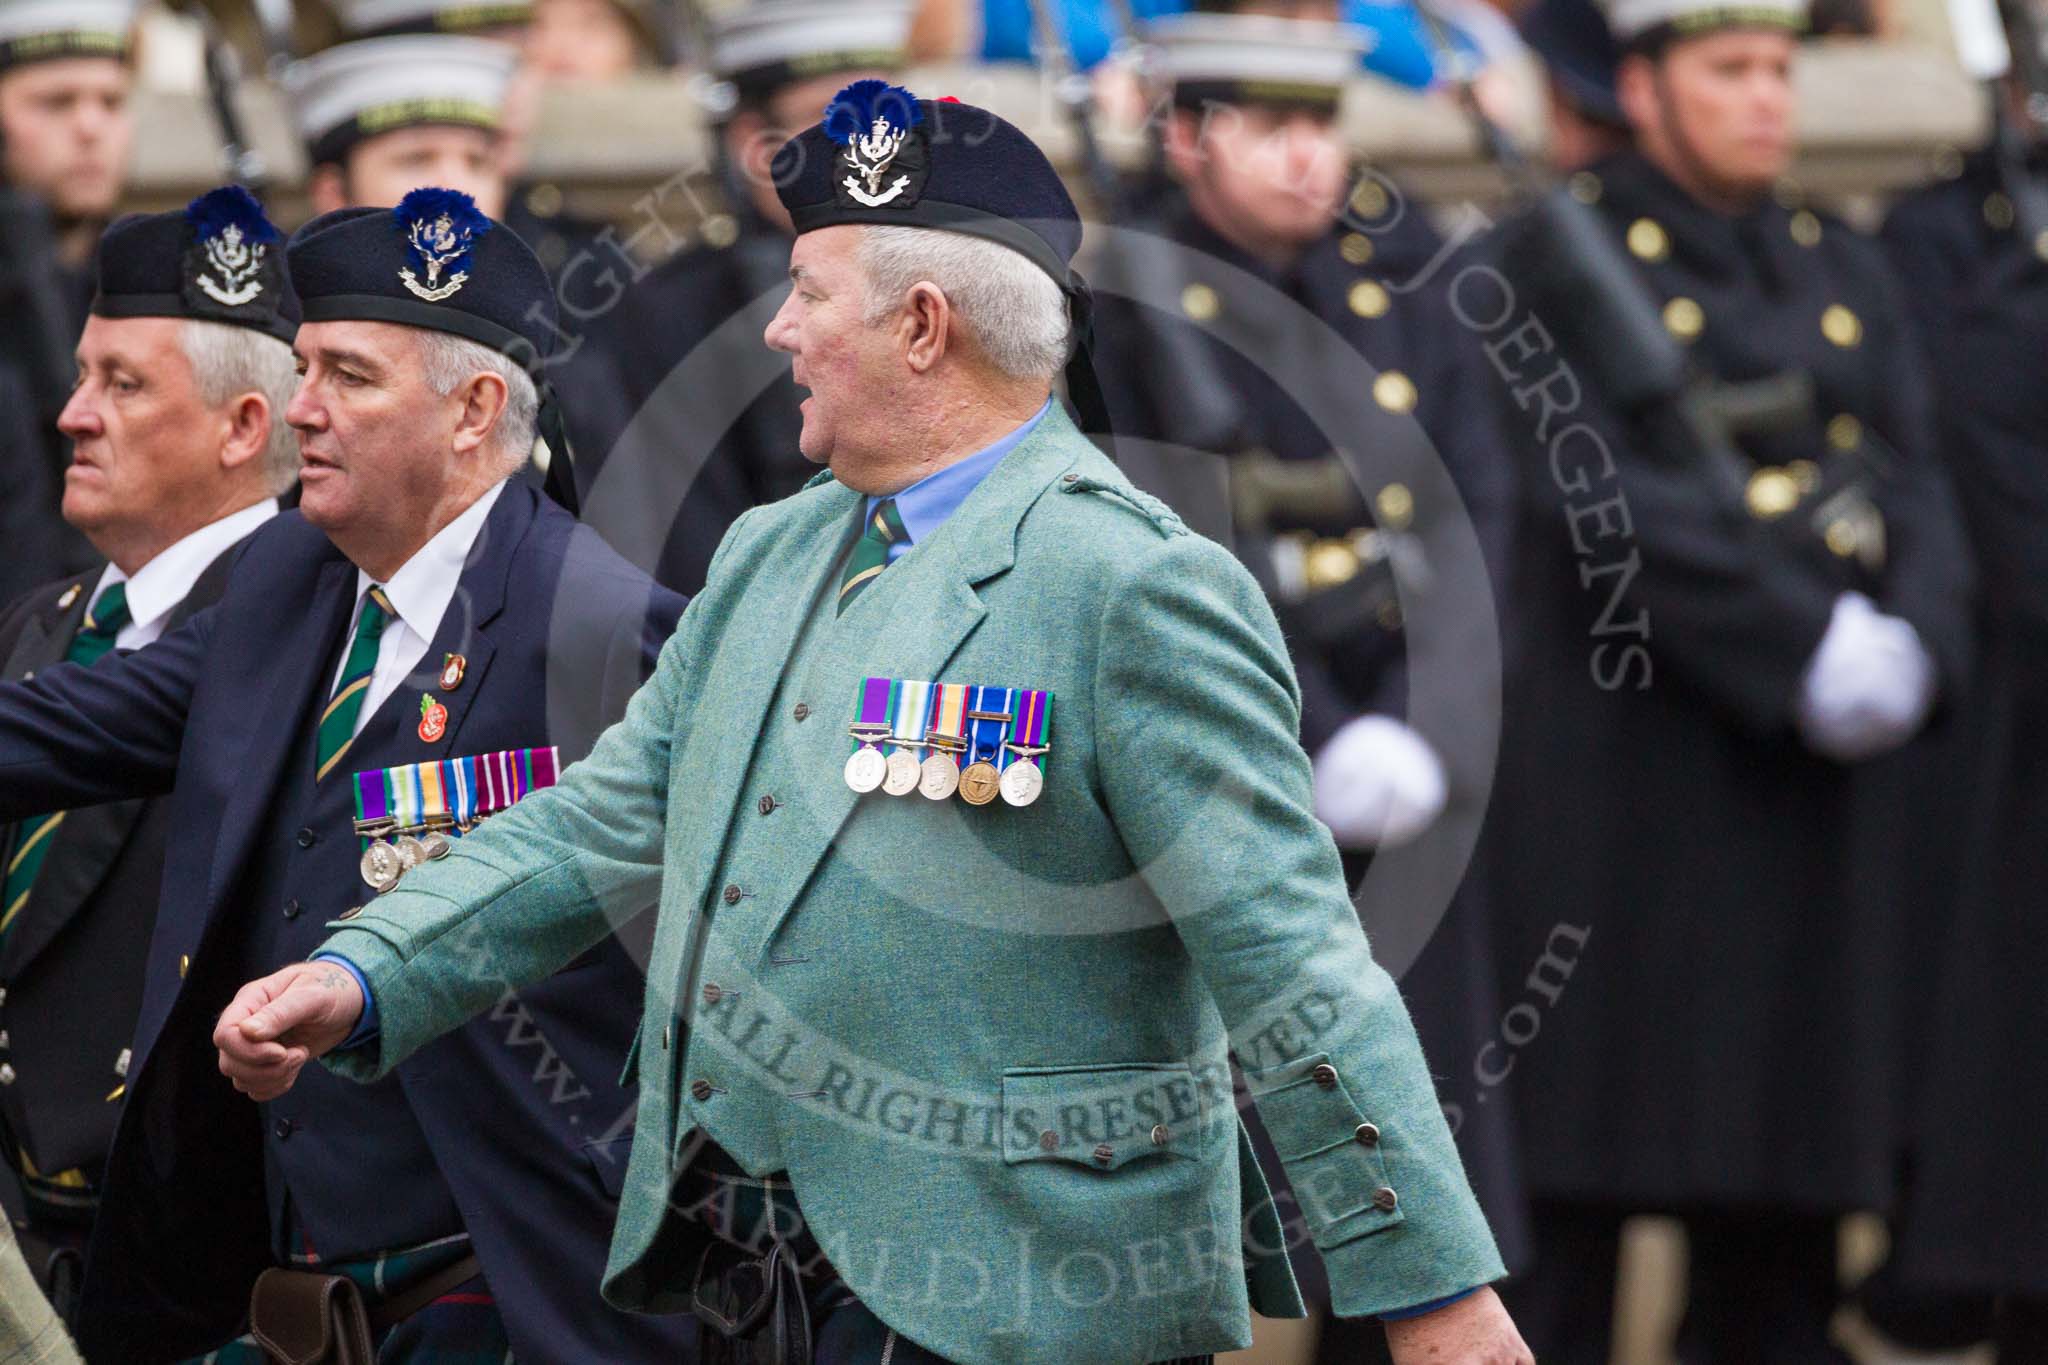 Remembrance Sunday at the Cenotaph 2015: Group A8, Queen's Own Highlanders Regimental Association.
Cenotaph, Whitehall, London SW1,
London,
Greater London,
United Kingdom,
on 08 November 2015 at 12:10, image #1243